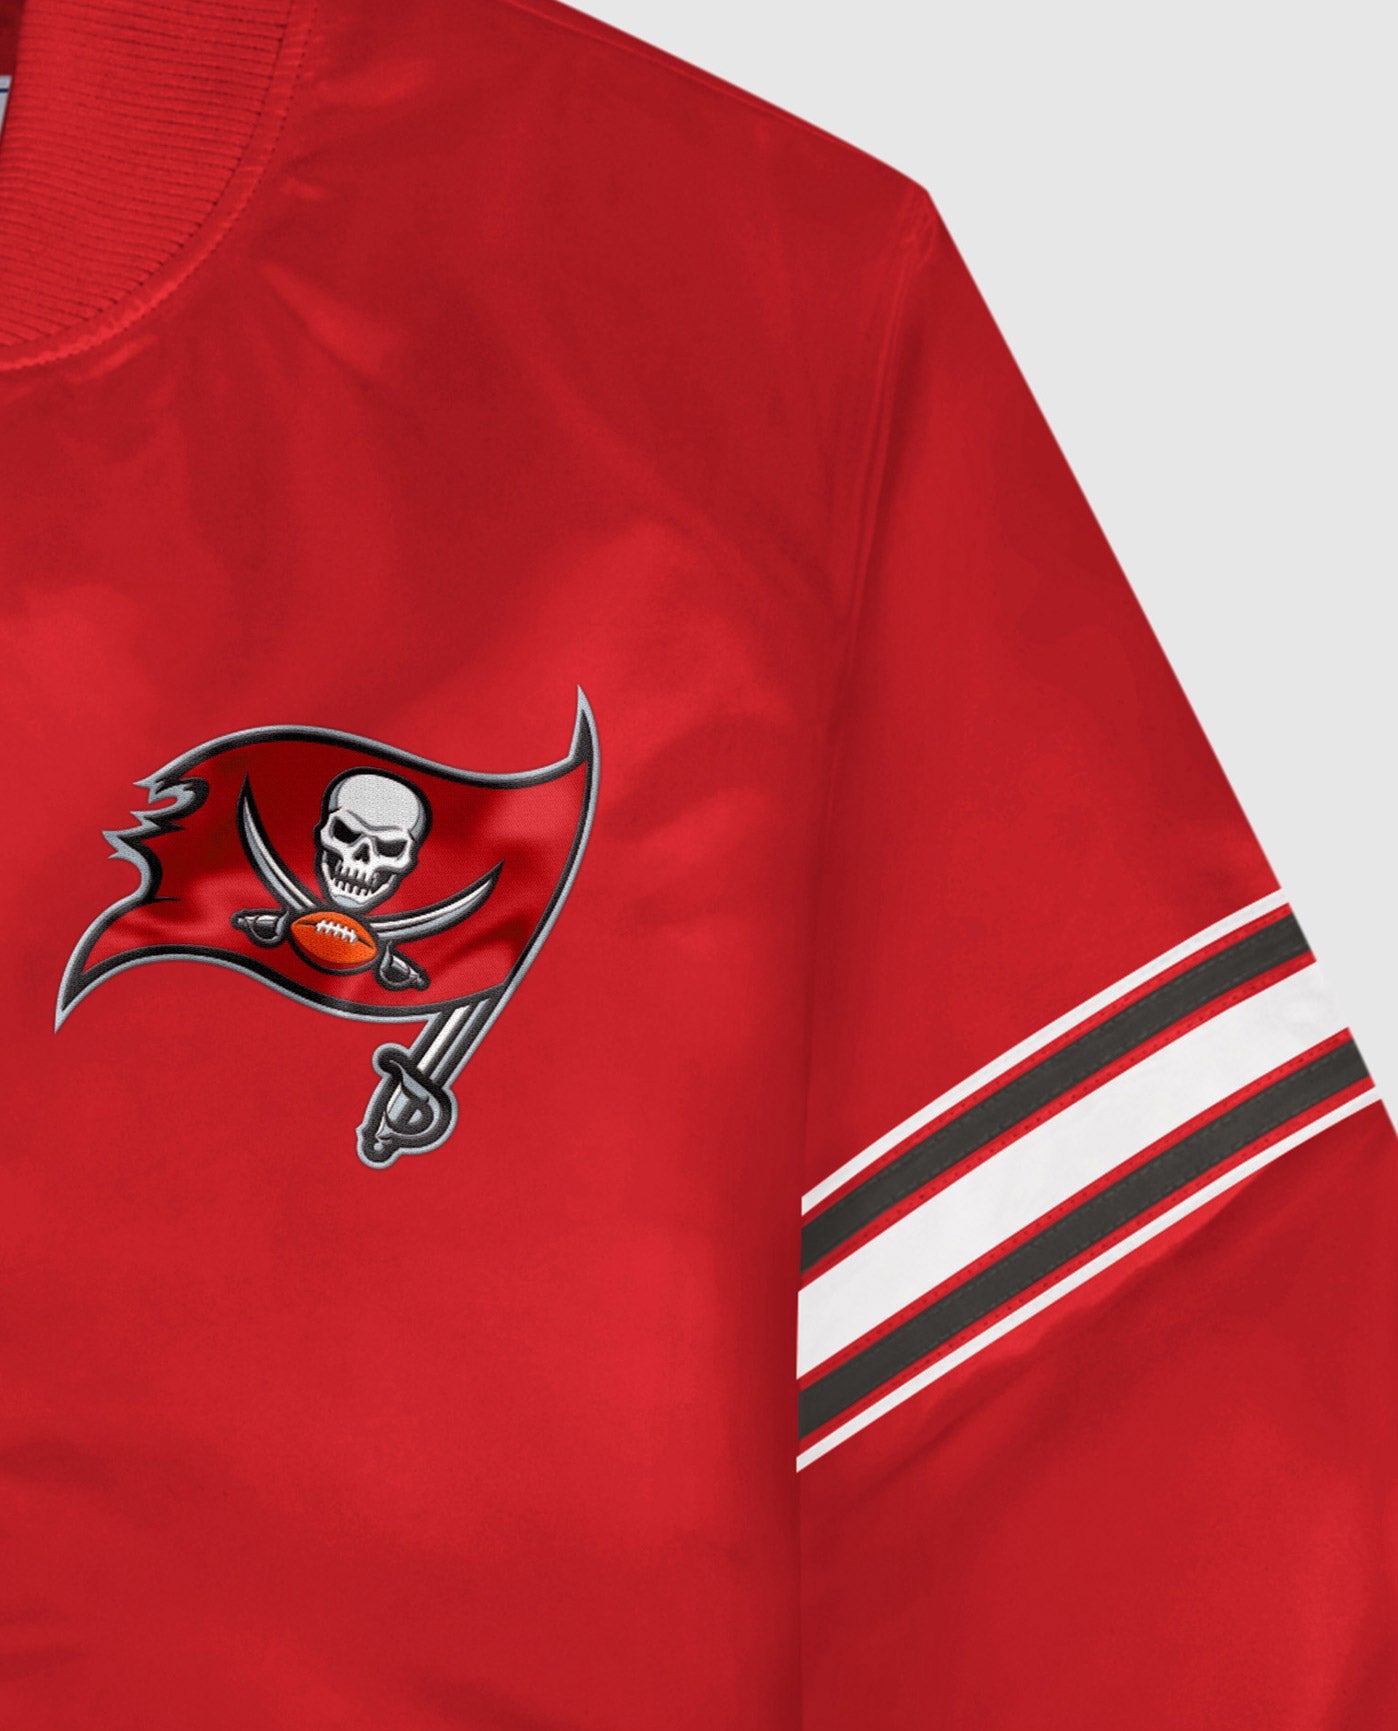 Tampa Bay Buccaneers Twill Applique Logo And Color Stripe Sleeve | Buccaneers Red